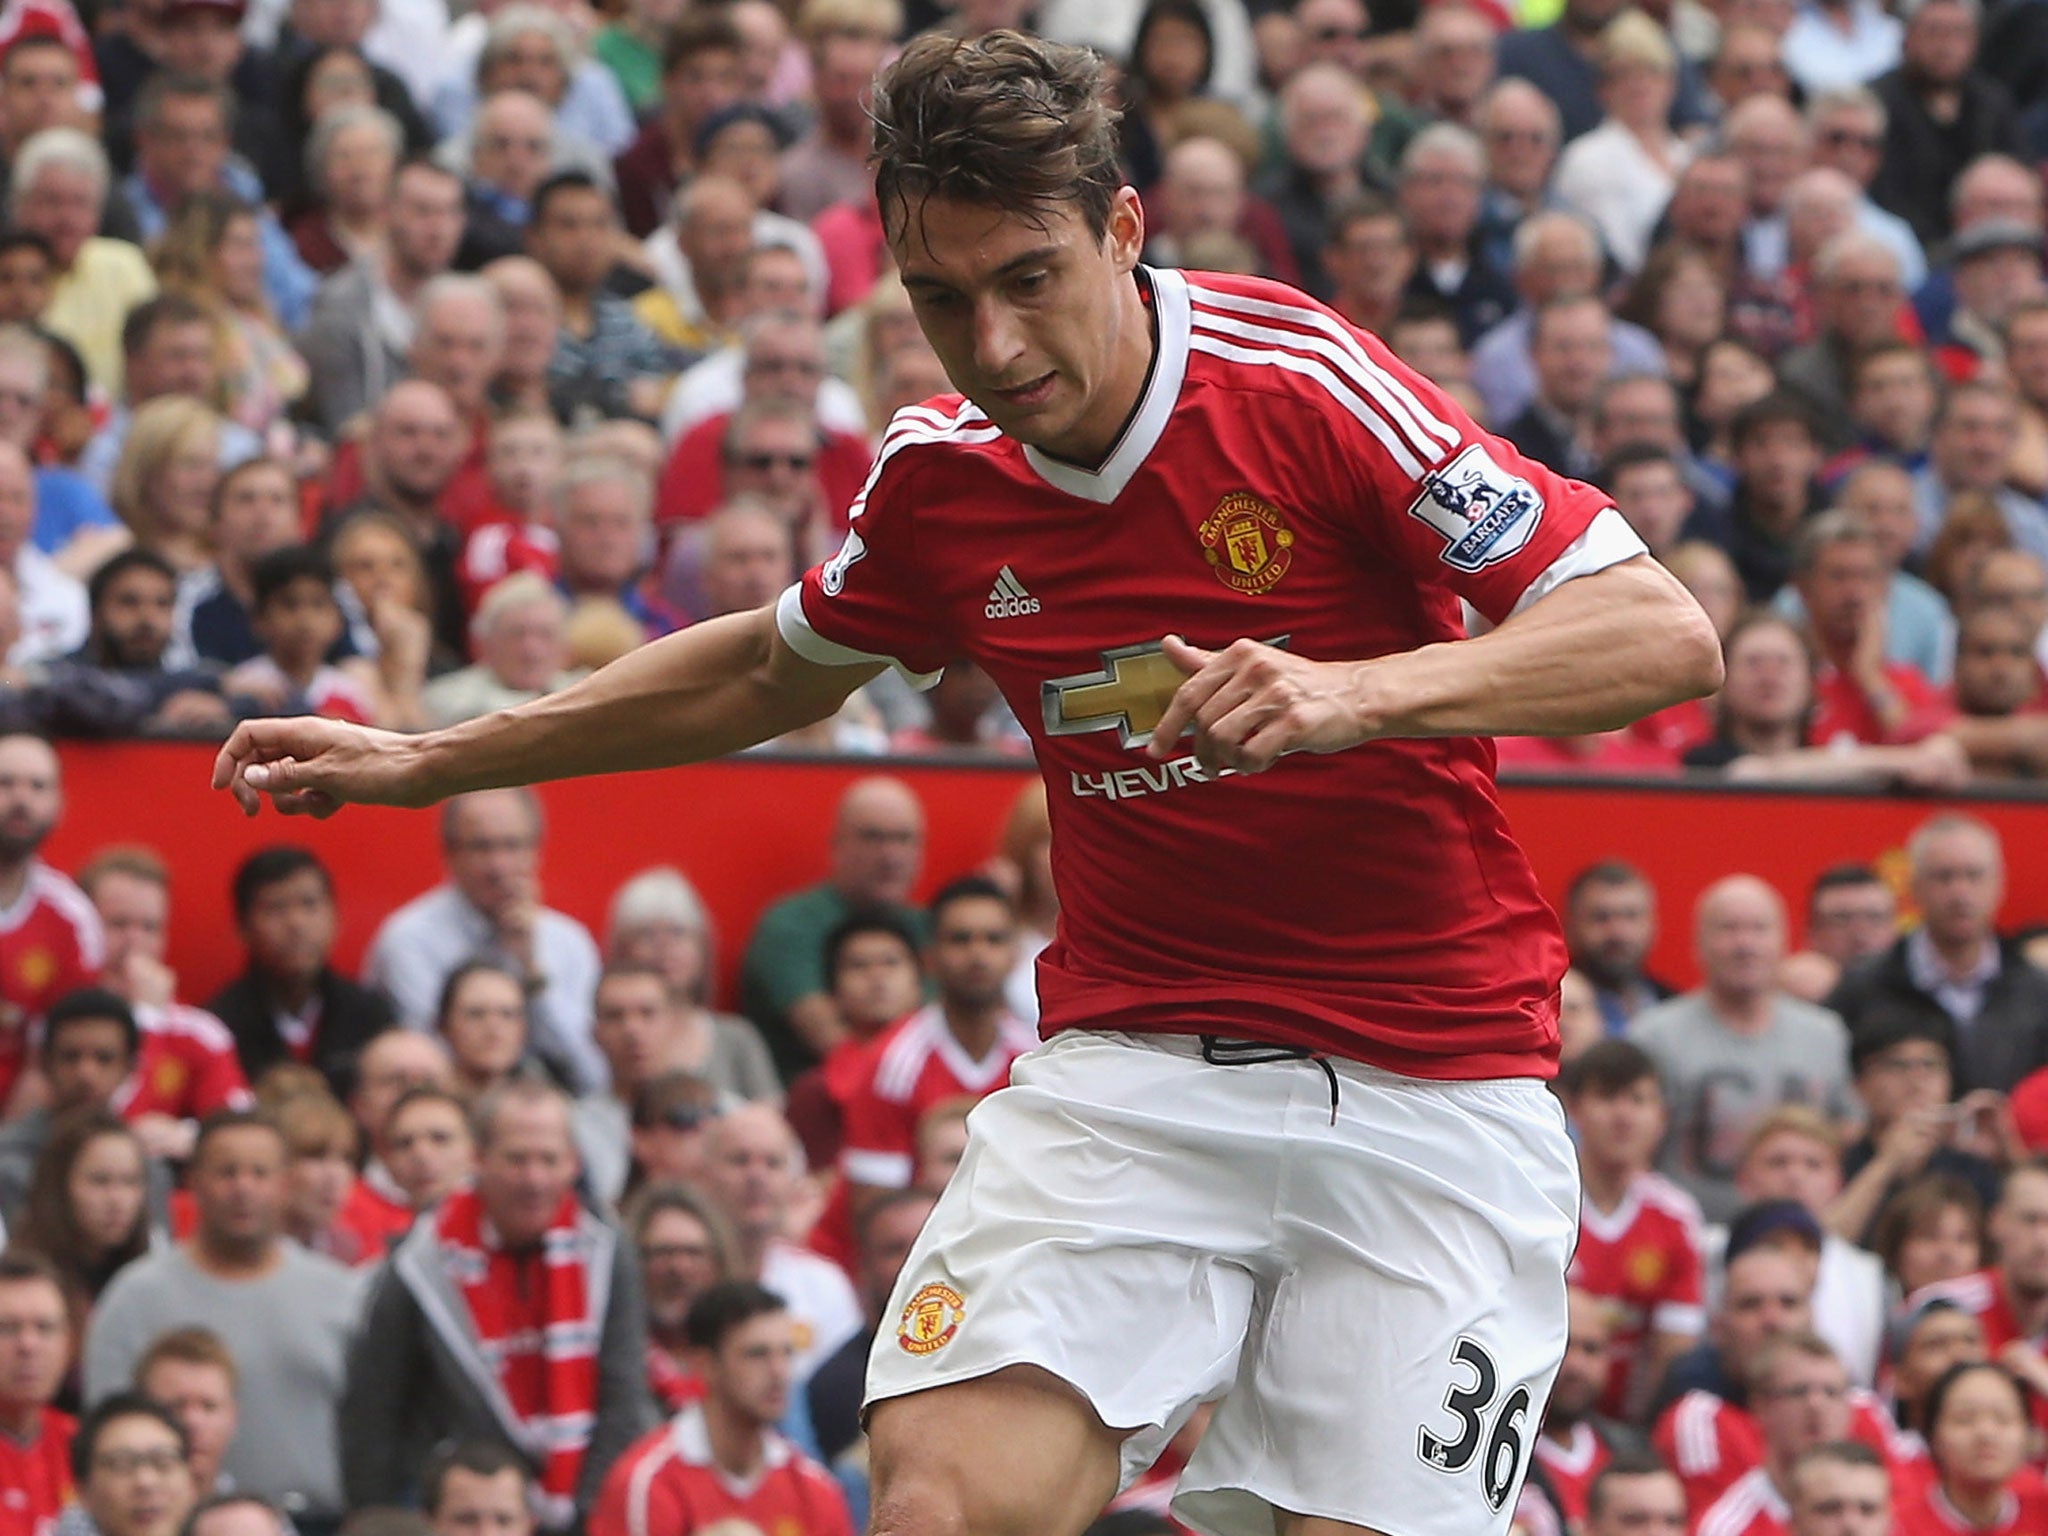 Matteo Darmian has impressed at Manchester United